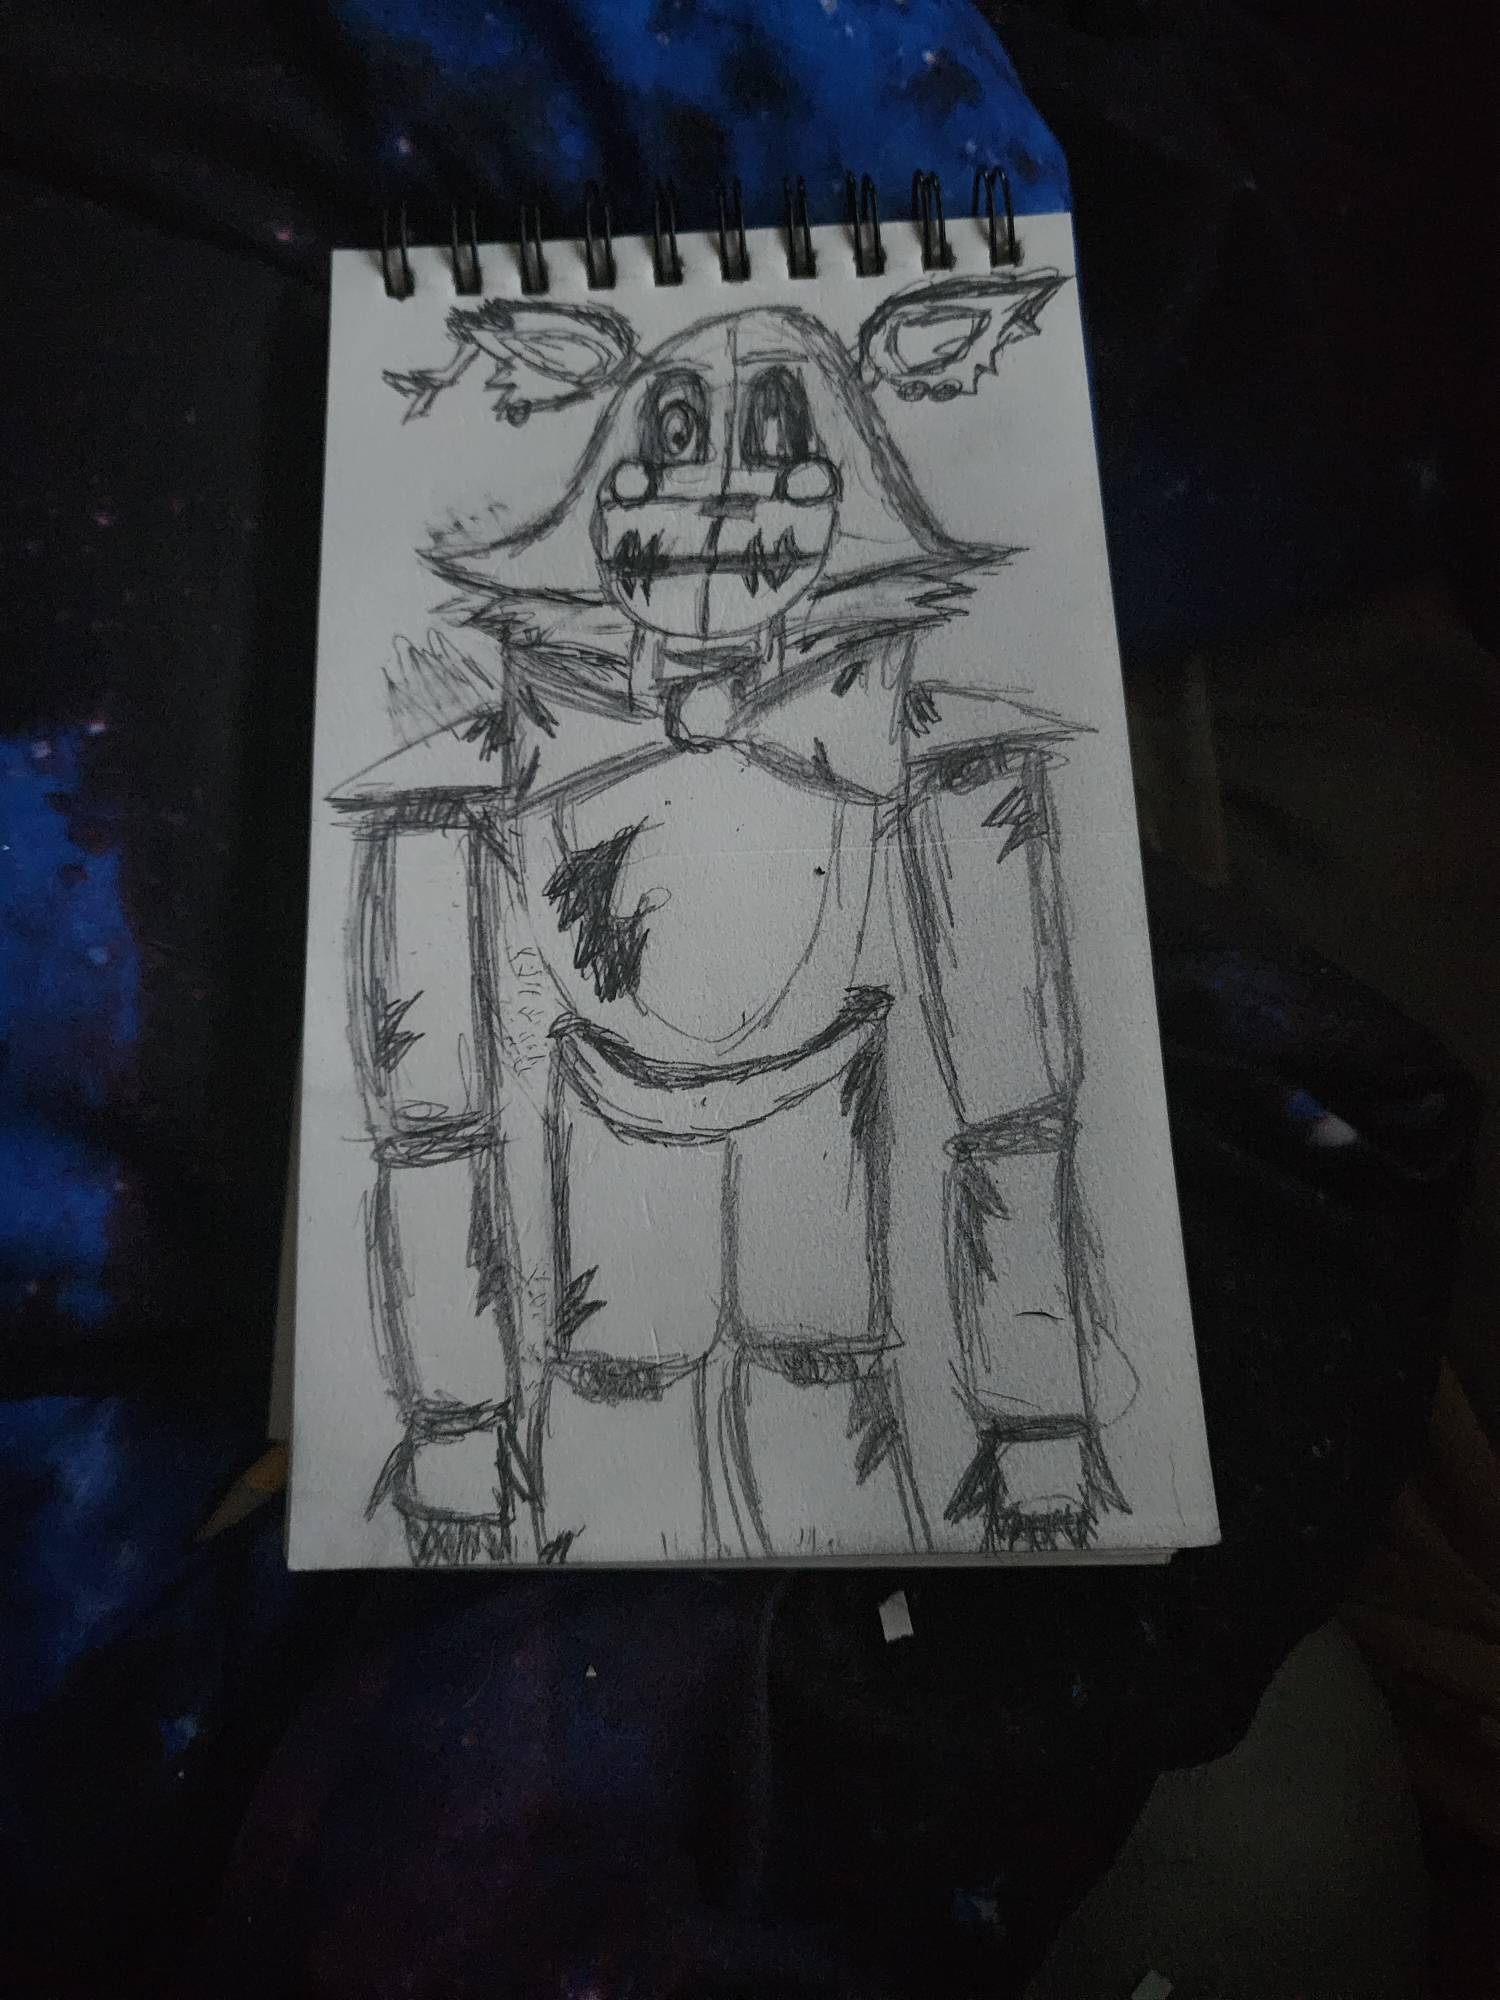 Showtime at Freddy's - Withered Foxy by ValentinGaio on DeviantArt